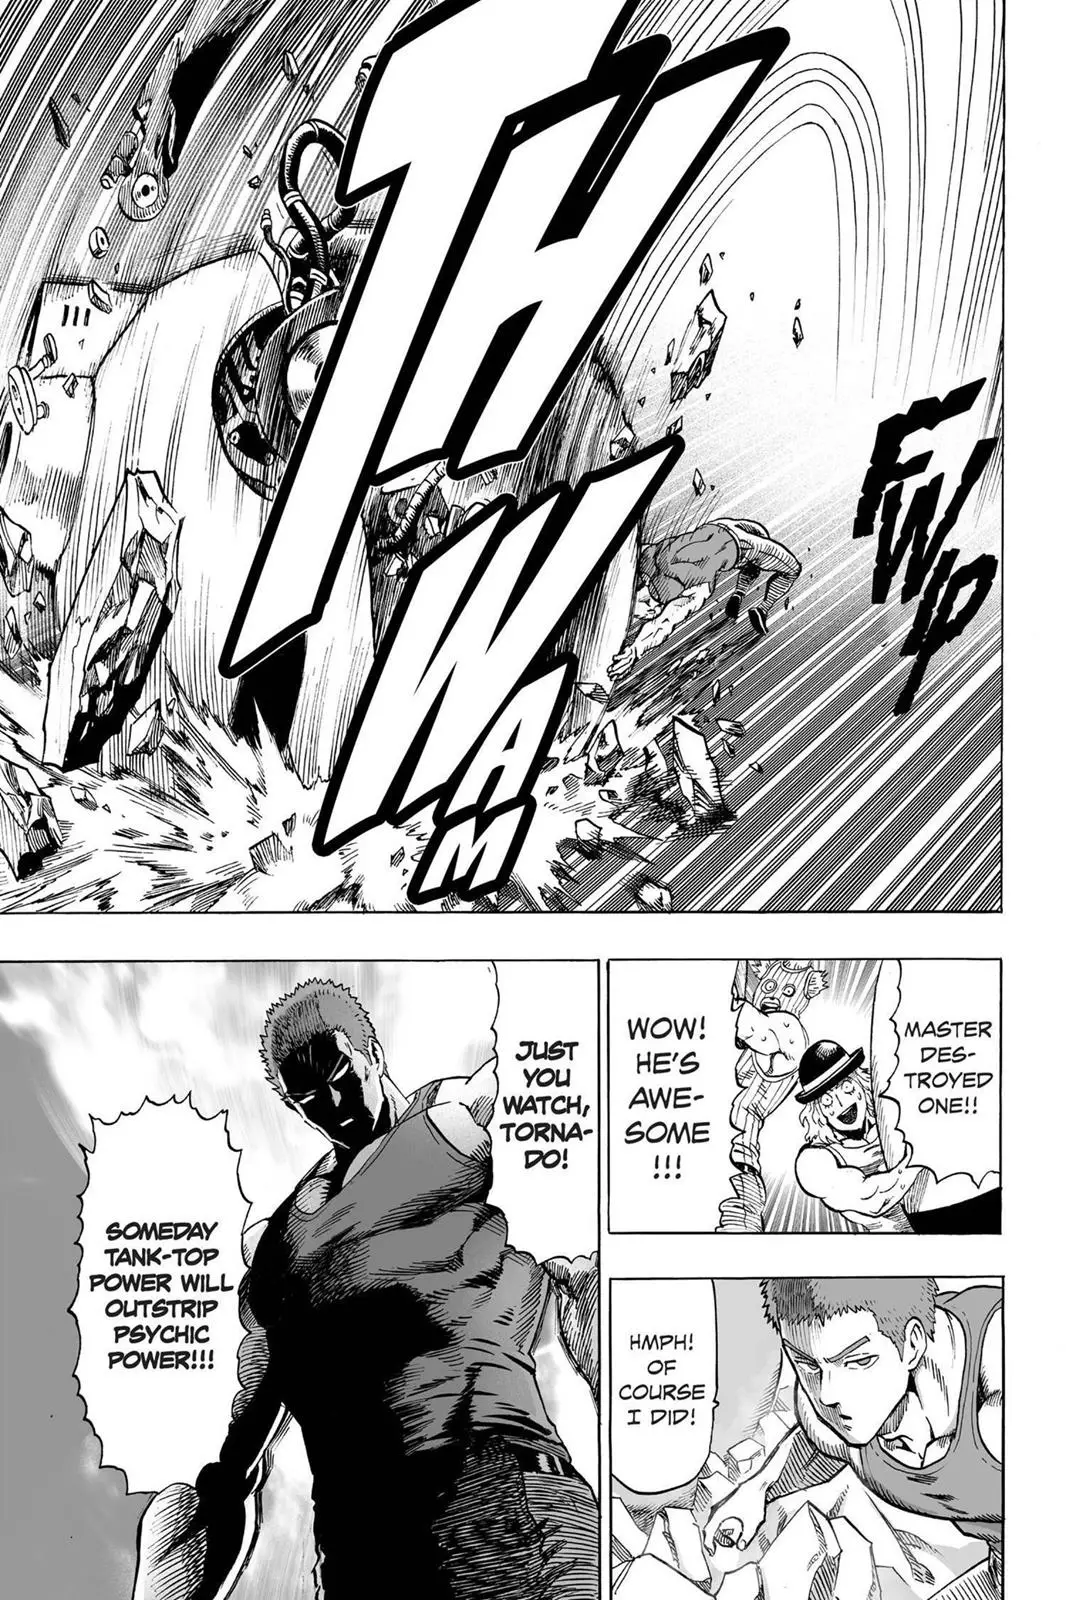 One Punch Man Chapter 37.5, READ One Punch Man Chapter 37.5 ONLINE, lost in the cloud genre,lost in the cloud gif,lost in the cloud girl,lost in the cloud goods,lost in the cloud goodreads,lost in the cloud,lost ark cloud gaming,lost odyssey cloud gaming,lost in the cloud fanart,lost in the cloud fanfic,lost in the cloud fandom,lost in the cloud first kiss,lost in the cloud font,lost in the cloud ending,lost in the cloud episode 97,lost in the cloud edit,lost in the cloud explained,lost in the cloud dog,lost in the cloud discord server,lost in the cloud desktop wallpaper,lost in the cloud drawing,can't find my cloud on network,lost in the cloud characters,lost in the cloud chapter 93 release date,lost in the cloud birthday,lost in the cloud birthday art,lost in the cloud background,lost in the cloud banner,lost in the clouds meaning,what is the black cloud in lost,lost in the cloud ao3,lost in the cloud anime,lost in the cloud art,lost in the cloud author twitter,lost in the cloud author instagram,lost in the cloud artist,lost in the cloud acrylic stand,lost in the cloud artist twitter,lost in the cloud art style,lost in the cloud analysis